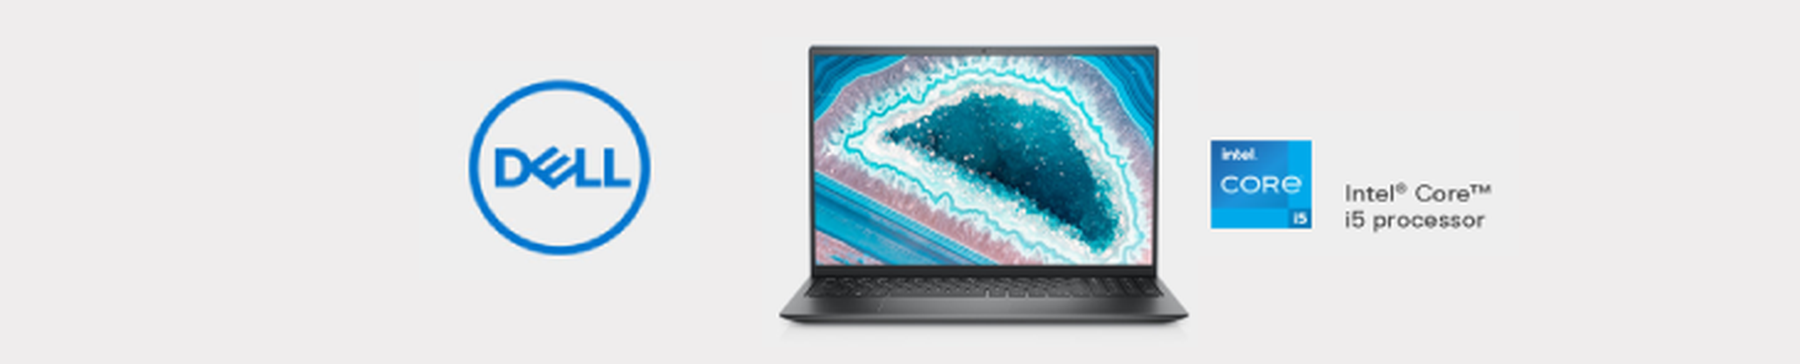 Score Rs.500 discount on Inspiron 15 laptop!